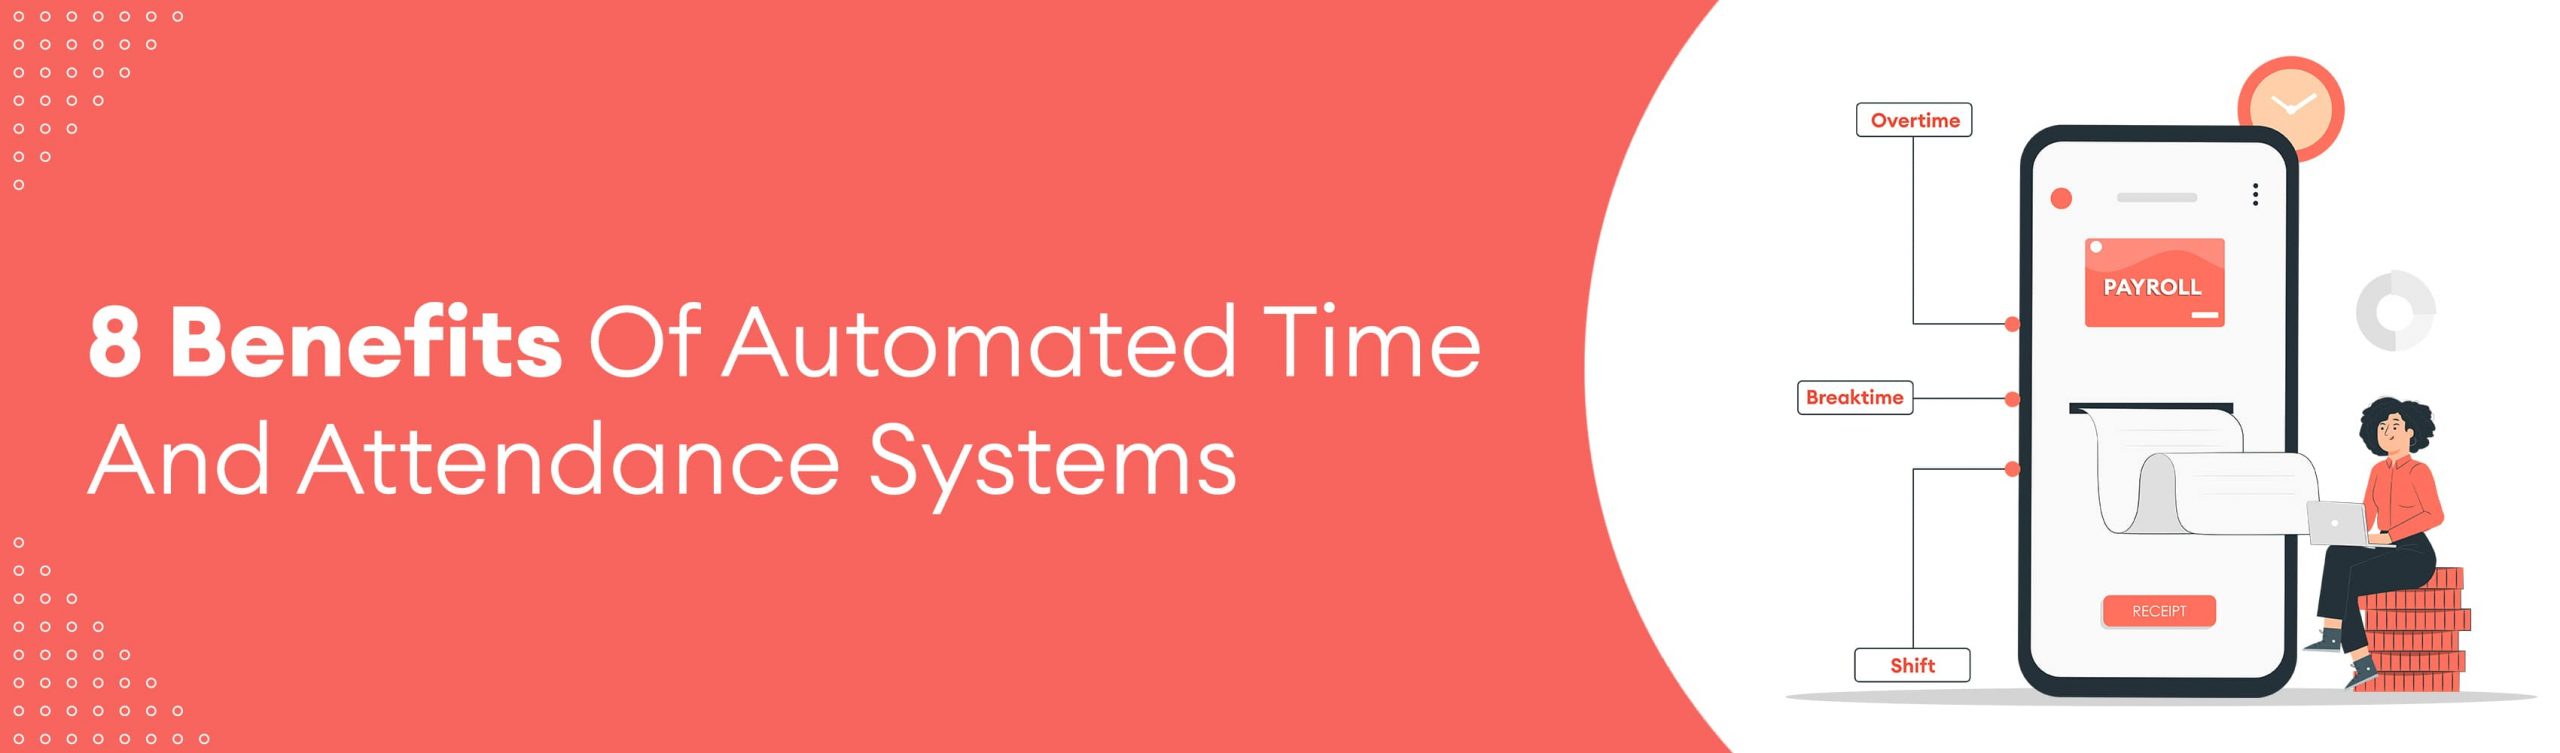 8 Benefits Of Automated Time And Attendance Systems